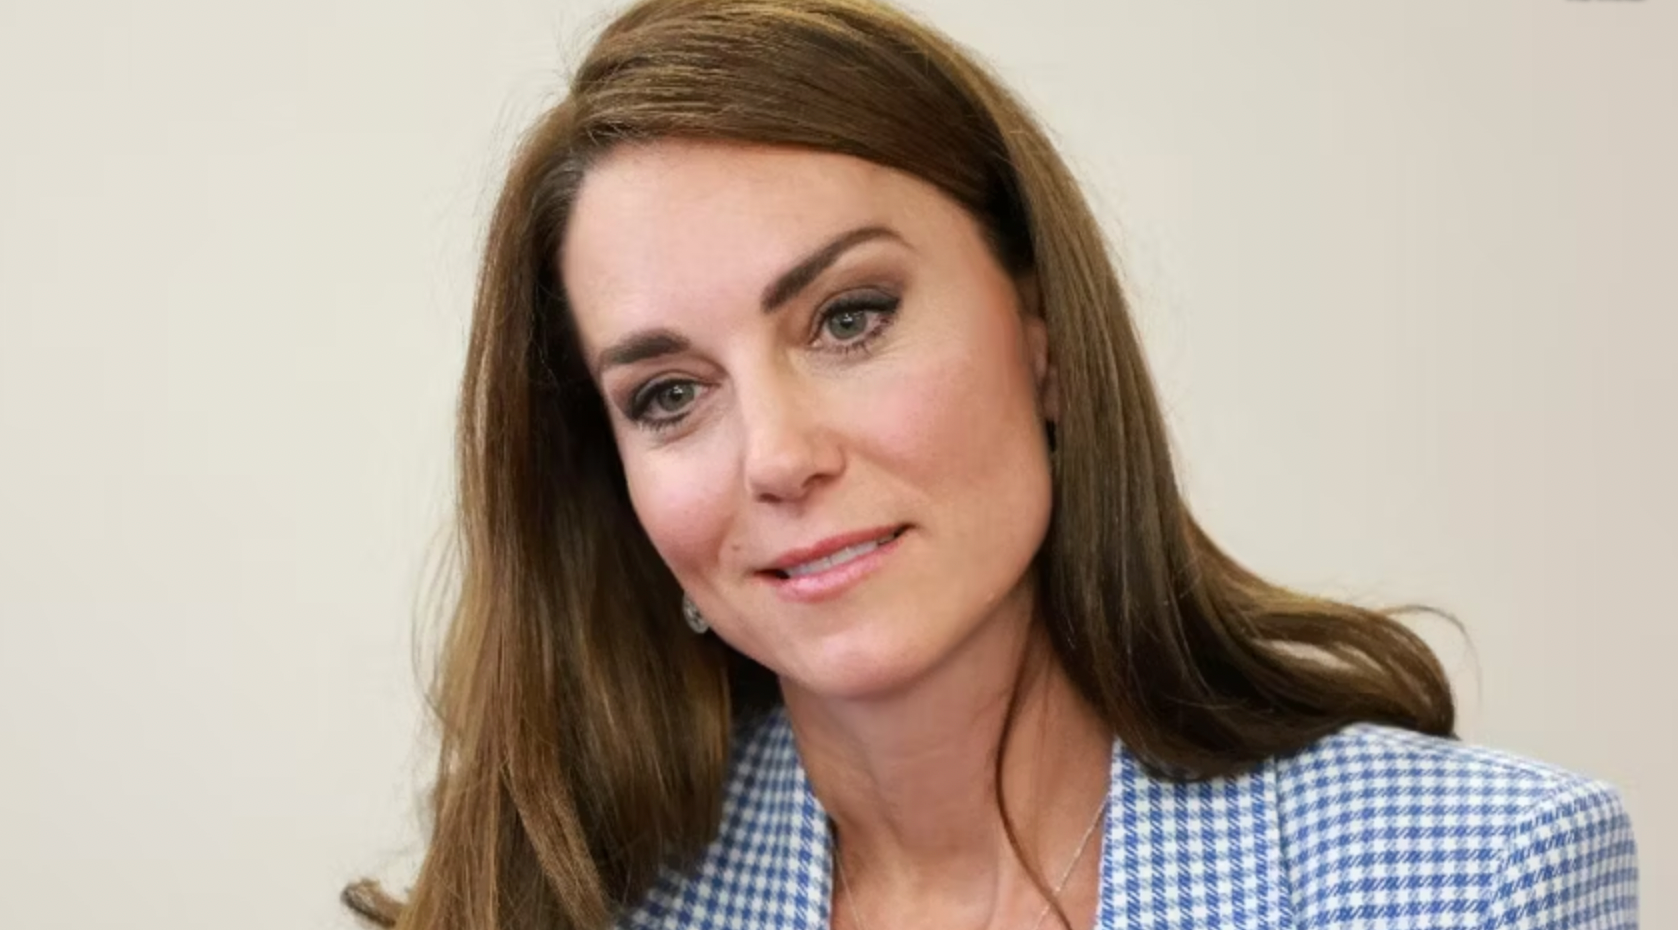 The Royal Family Demanded Kate Middleton Change Her Name Before Marriage